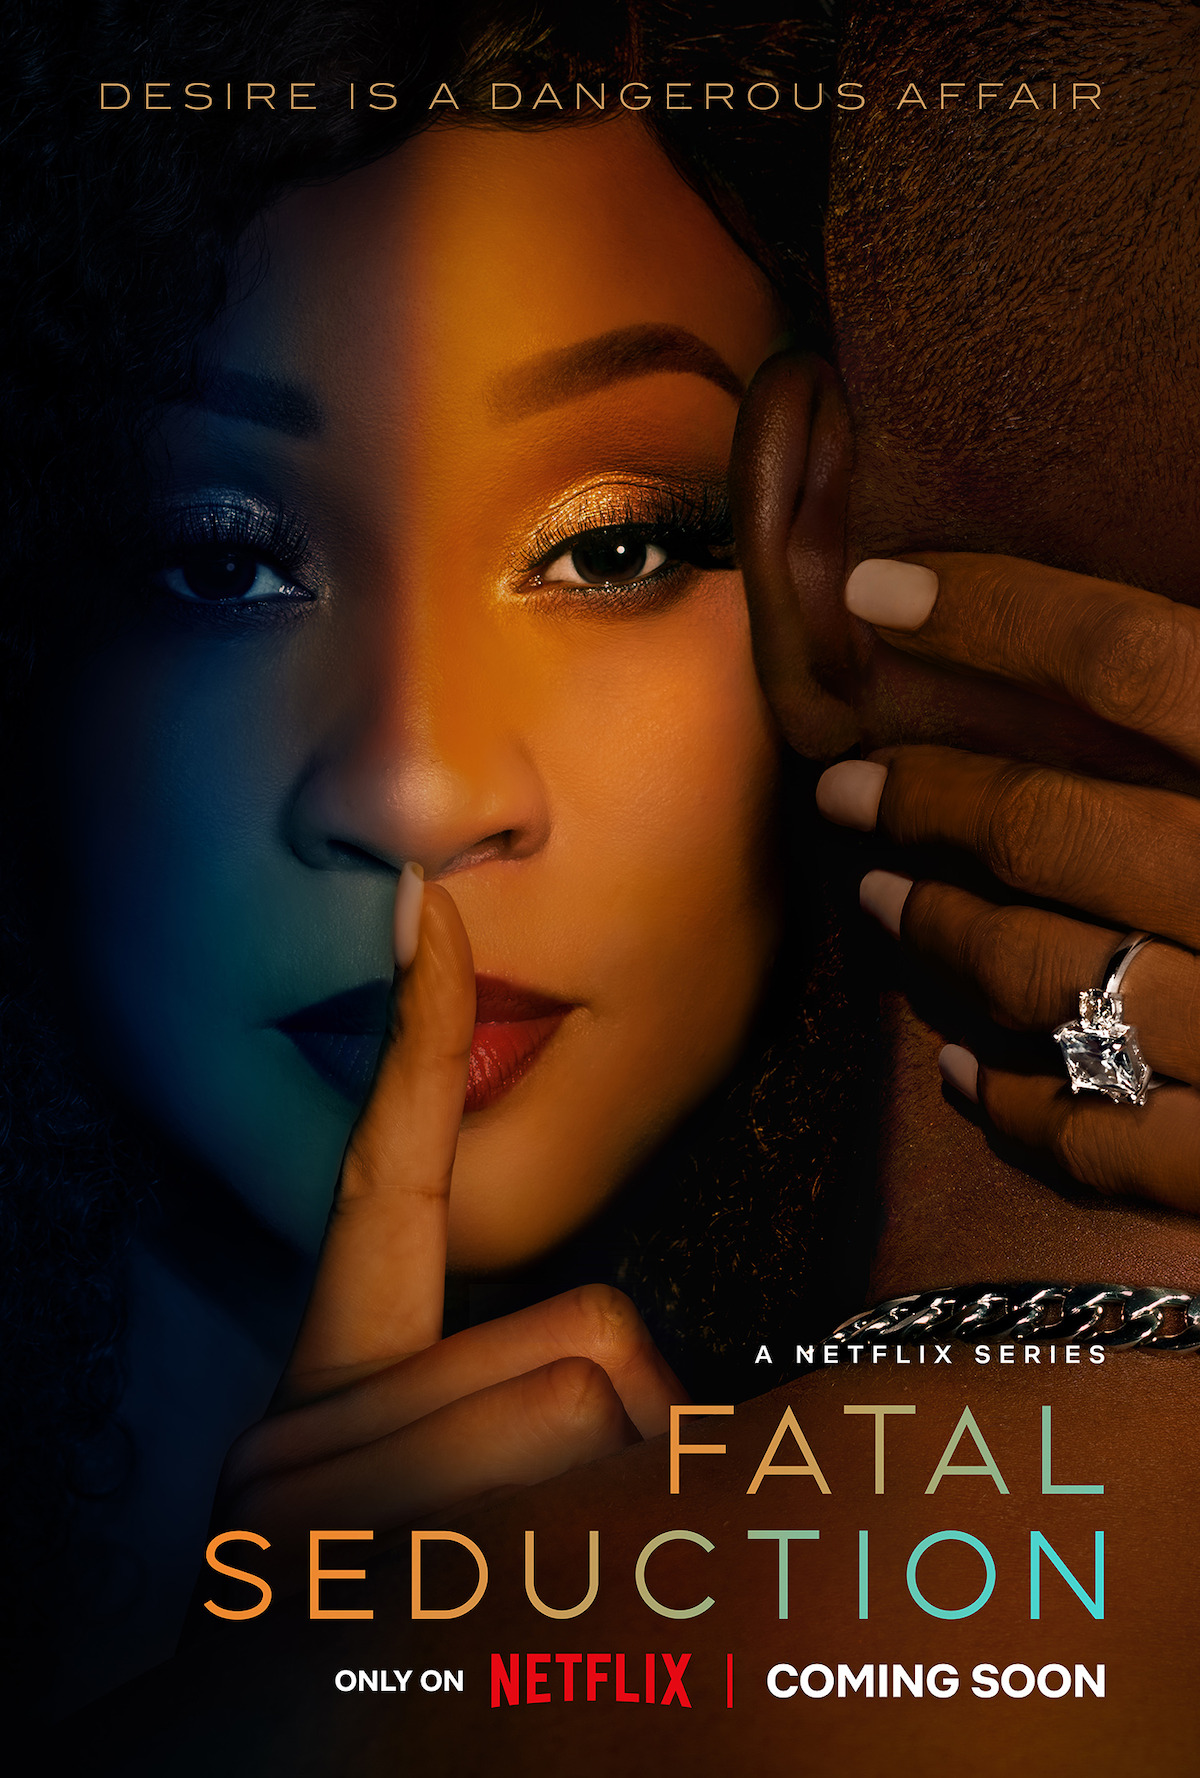 Fatal Seduction Cast, Plot, Release Date and Trailer pic pic